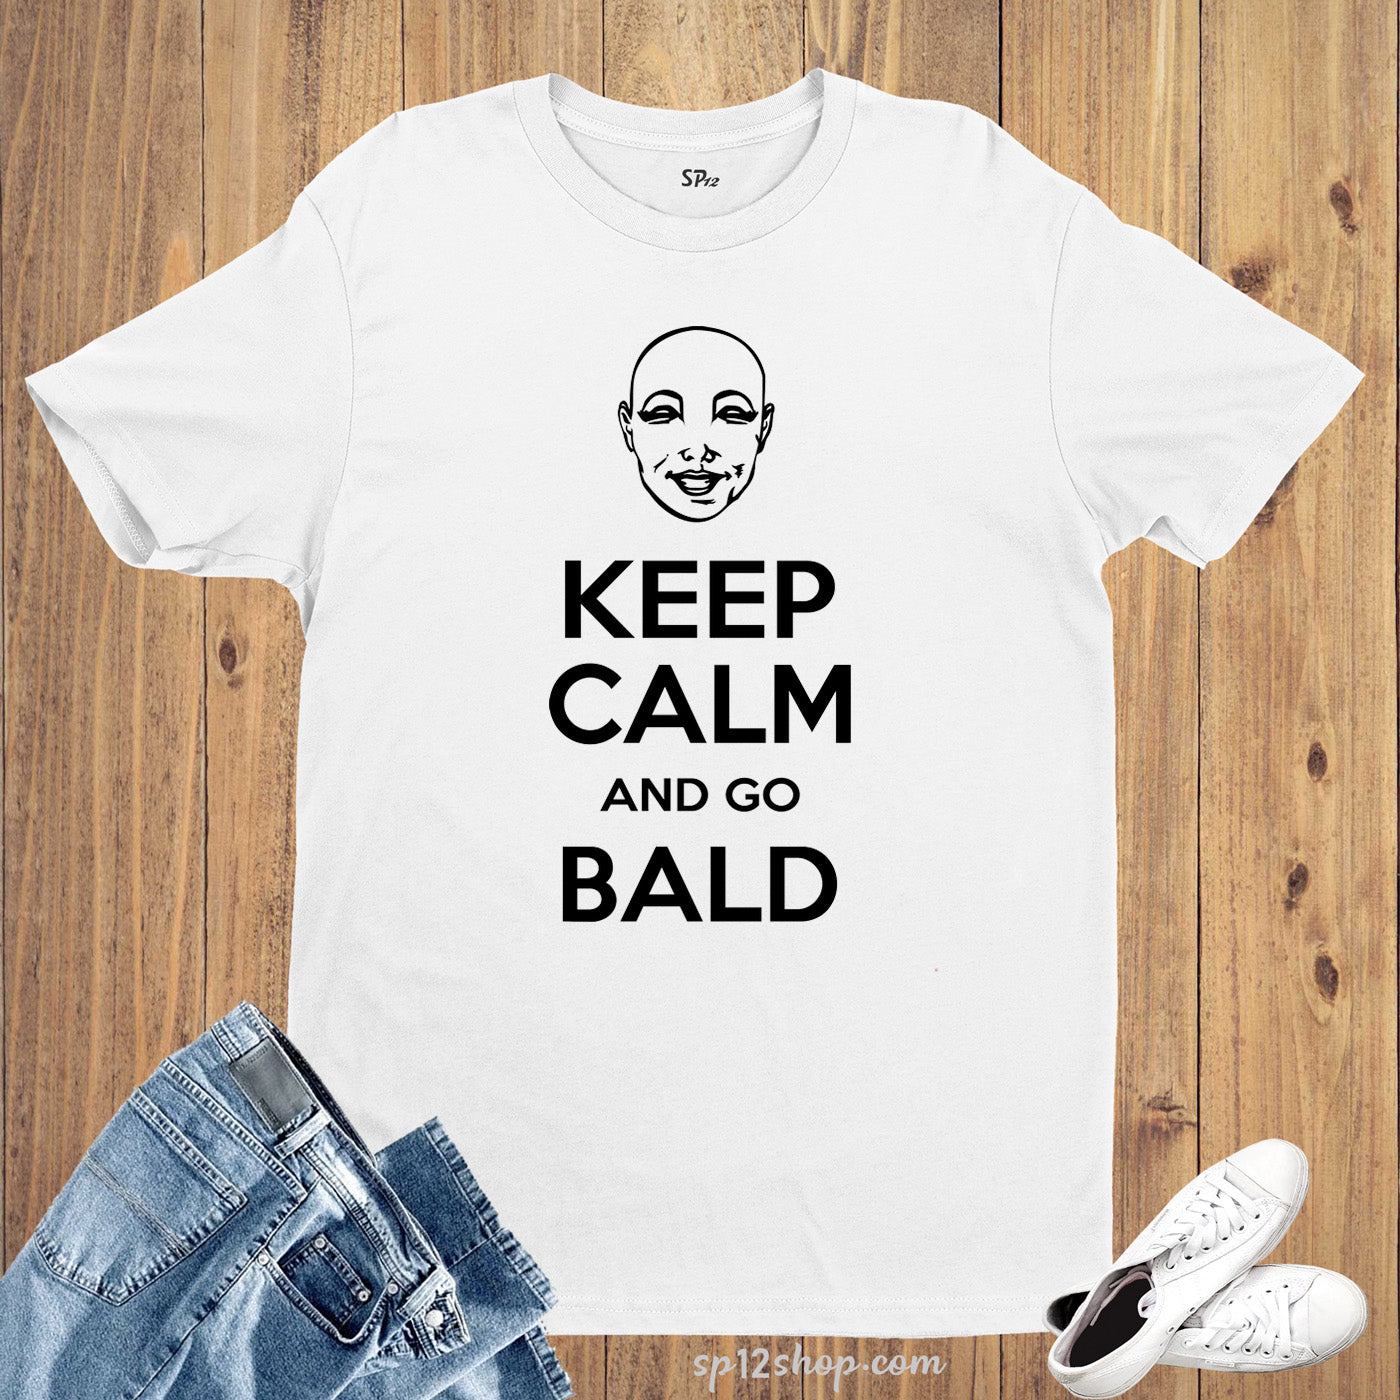 Awareness  T shirt Keep Calm And Go Bald Funny Charity